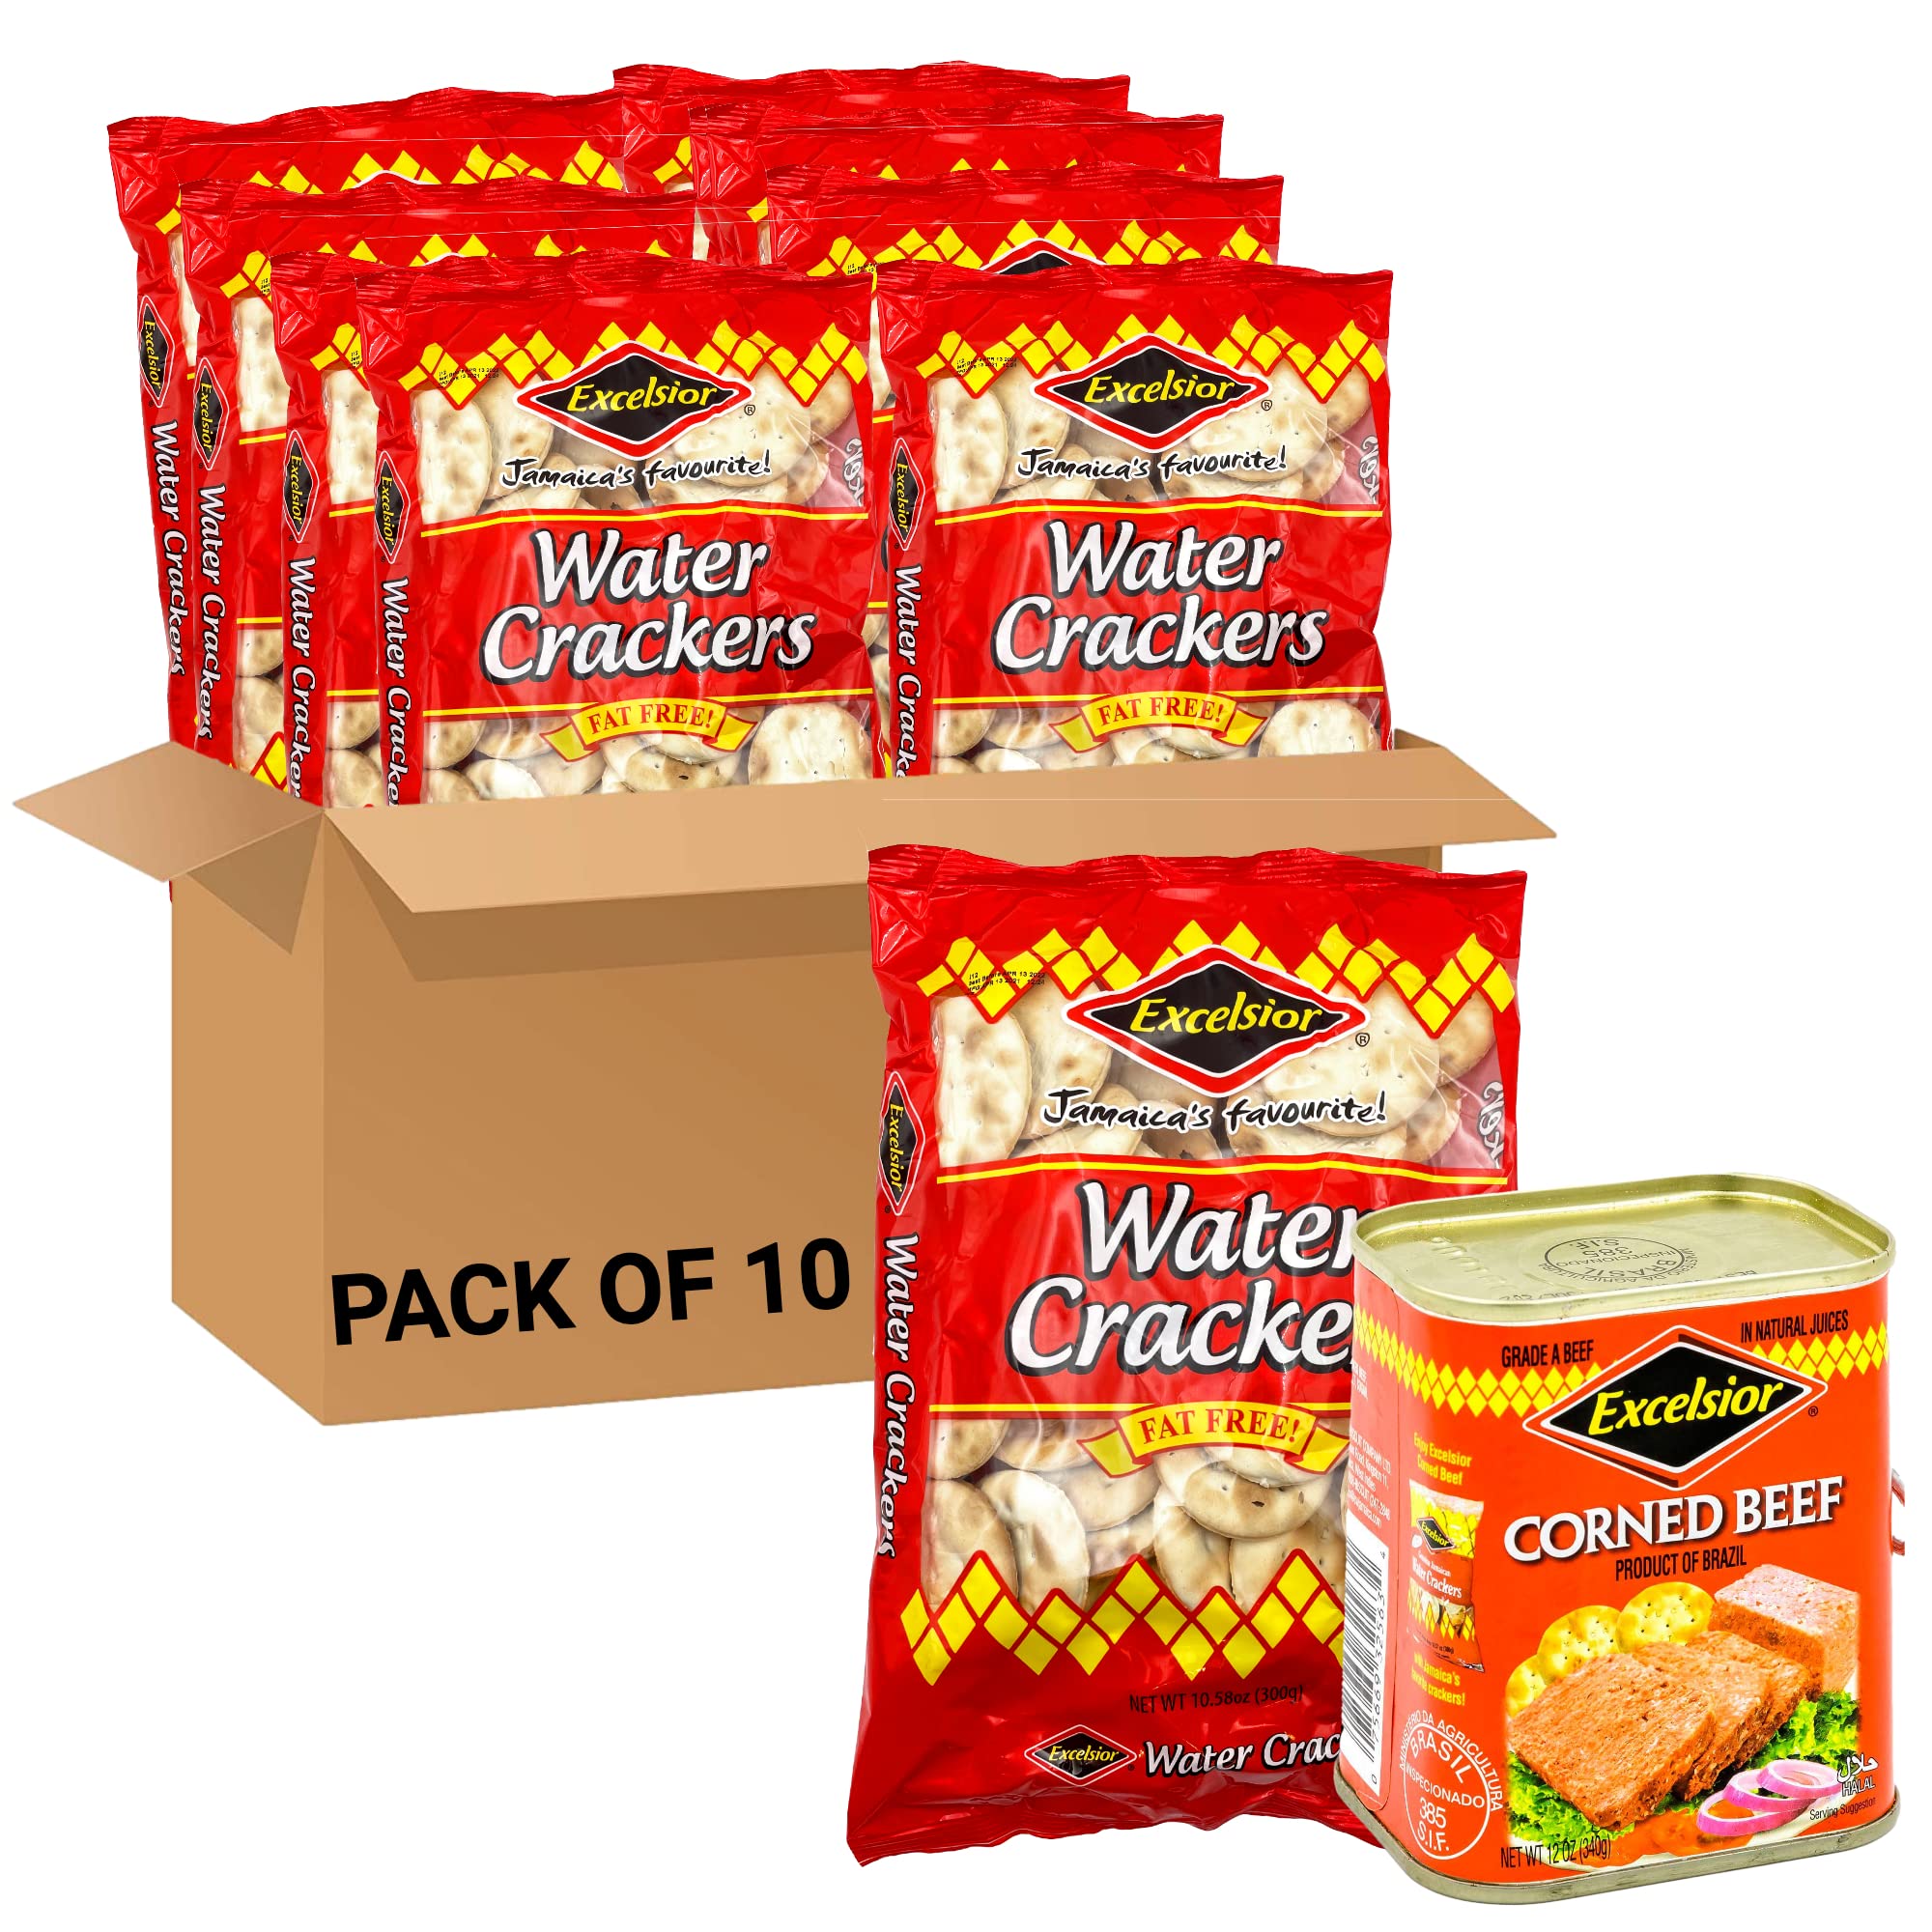 Excelsior Water Crackers, 10.58 oz (Pack of 10) + EXCELSIOR Corned Beef in Natural Juices, 12 Ounce